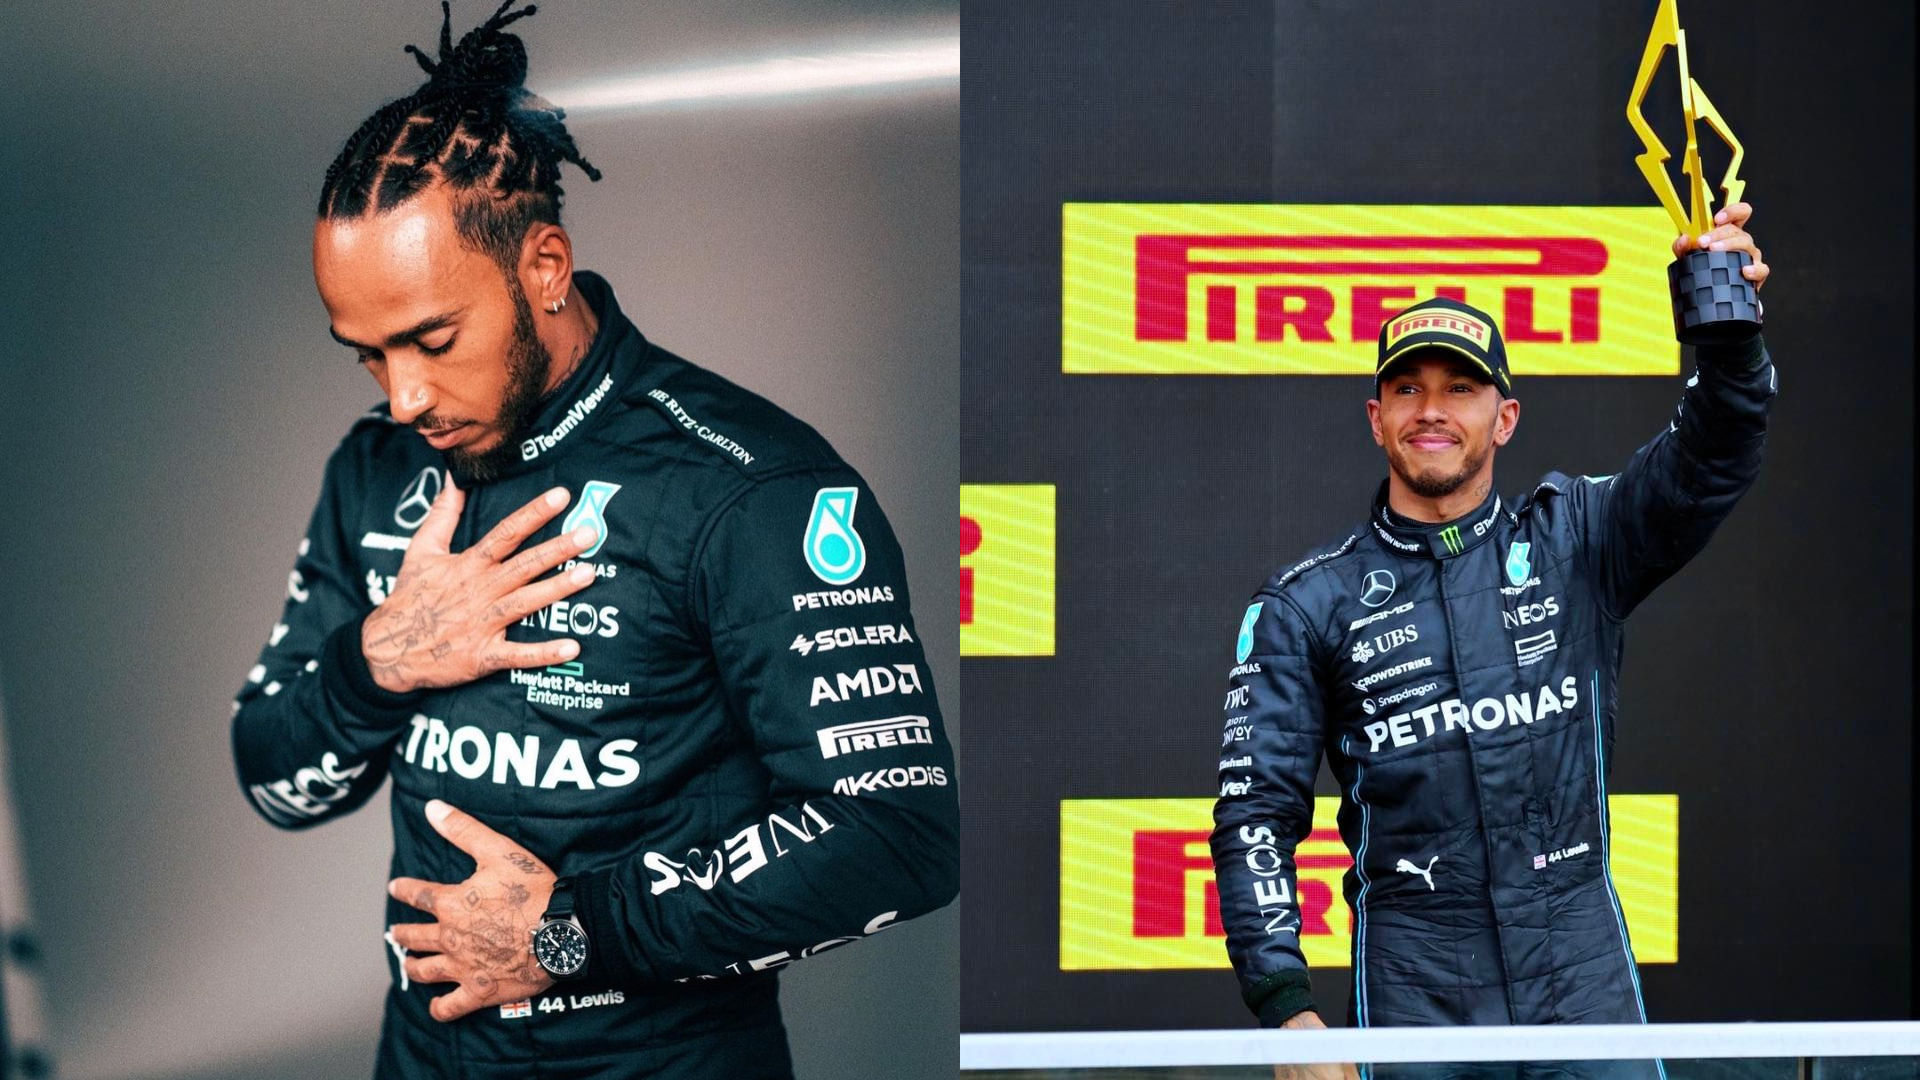 Lewis Hamilton Tests Positive for COVID-19, Pulls Out of Sakhir Grand Prix  | whas11.com